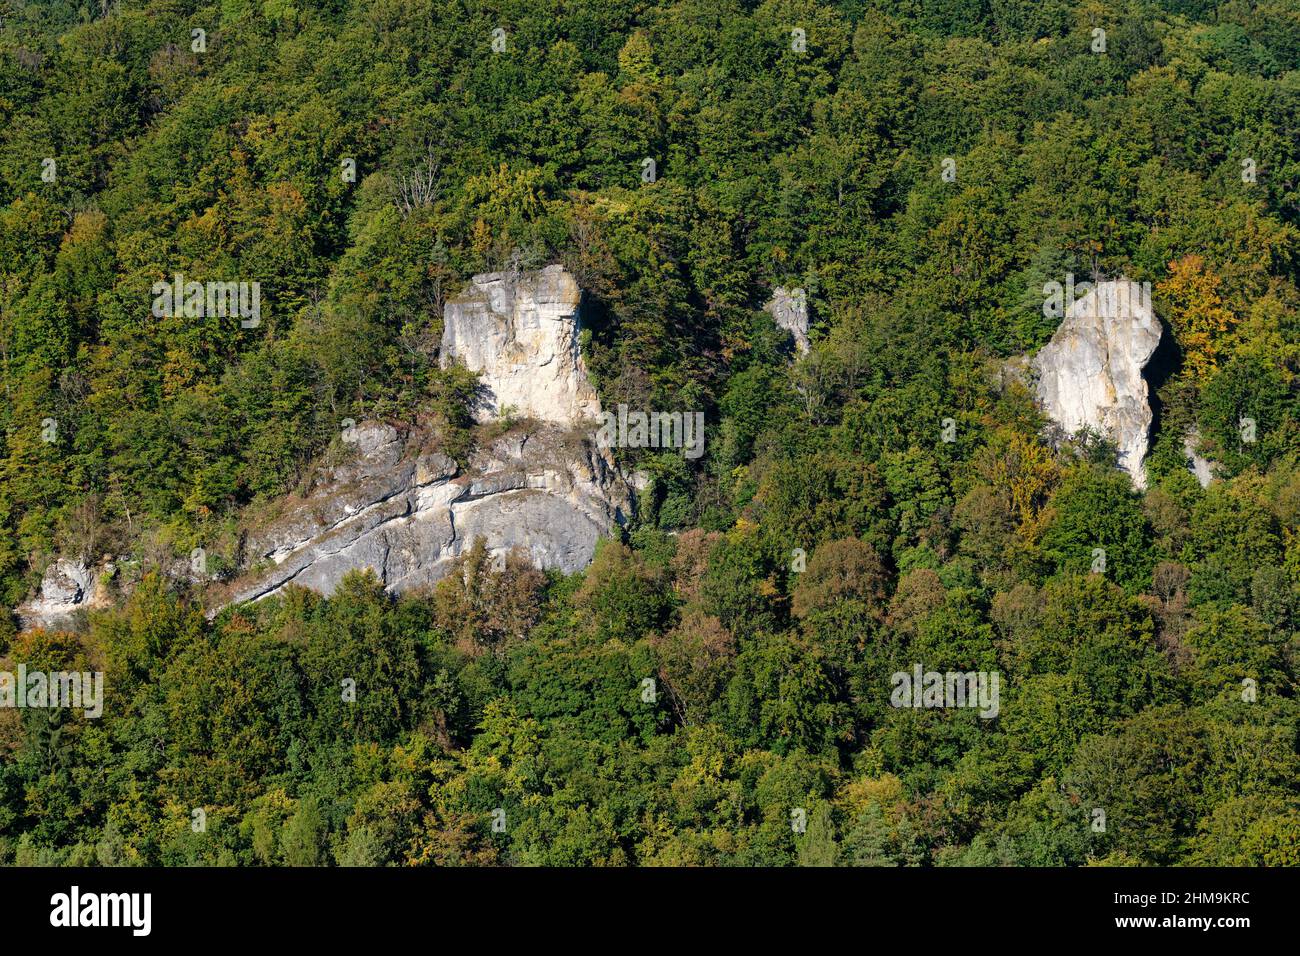 Beautiful rock formations in an autumn forest in the Franconian Switzerland. Seen in the Wiesenttal near Streitberg, Germany, in October Stock Photo